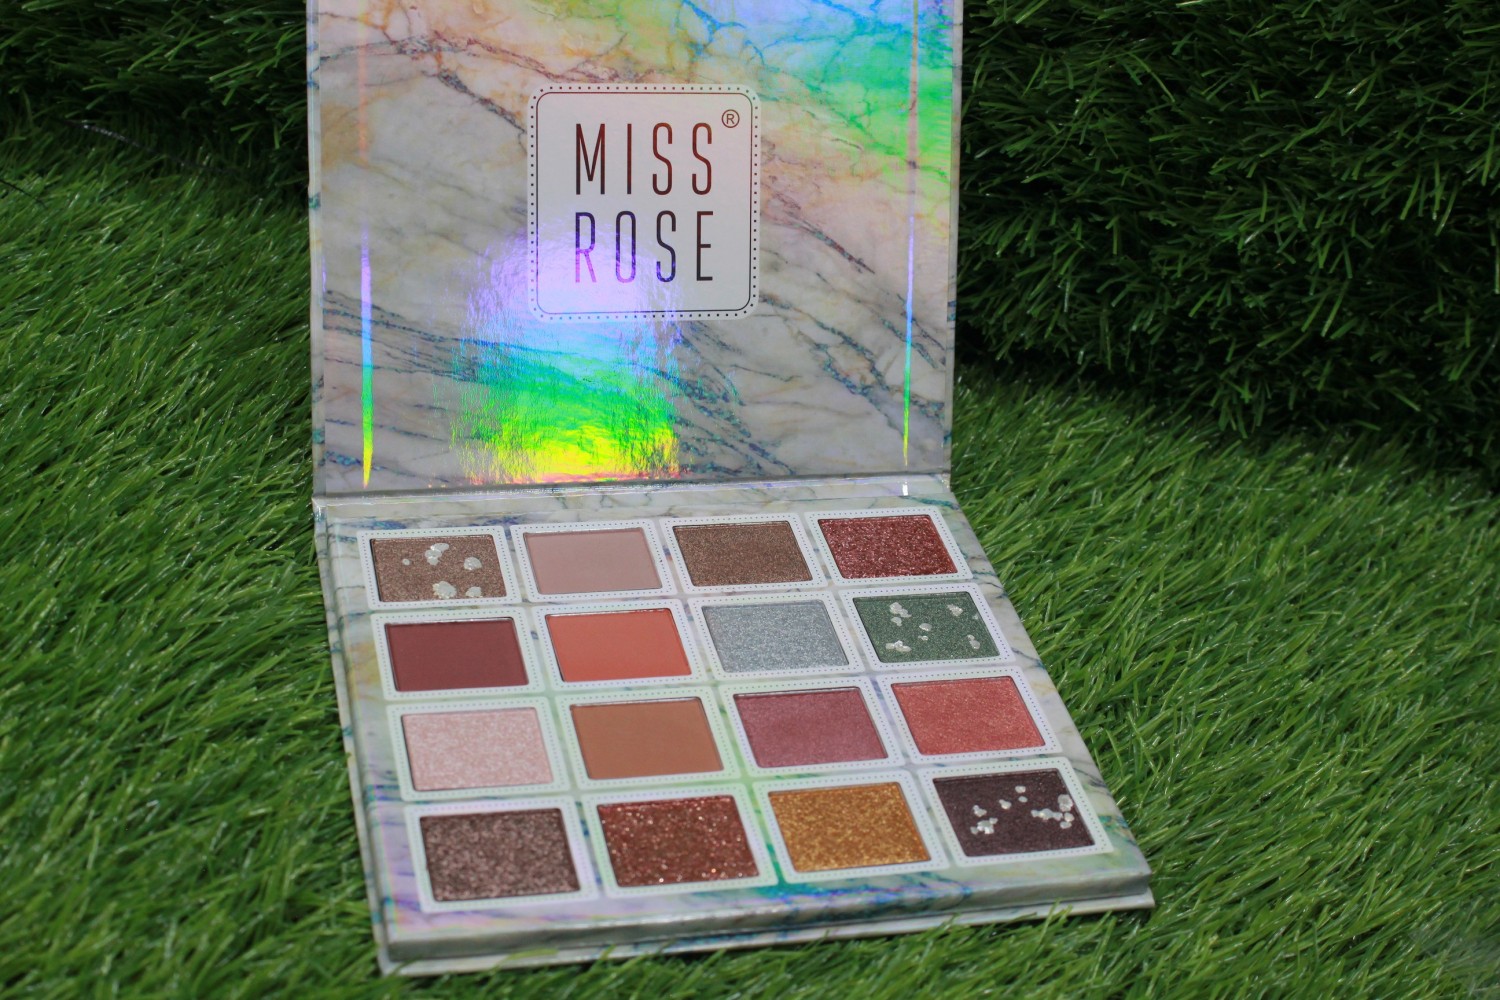 MISS ROSE EyeShadow Pallet with teracotta Setting - A